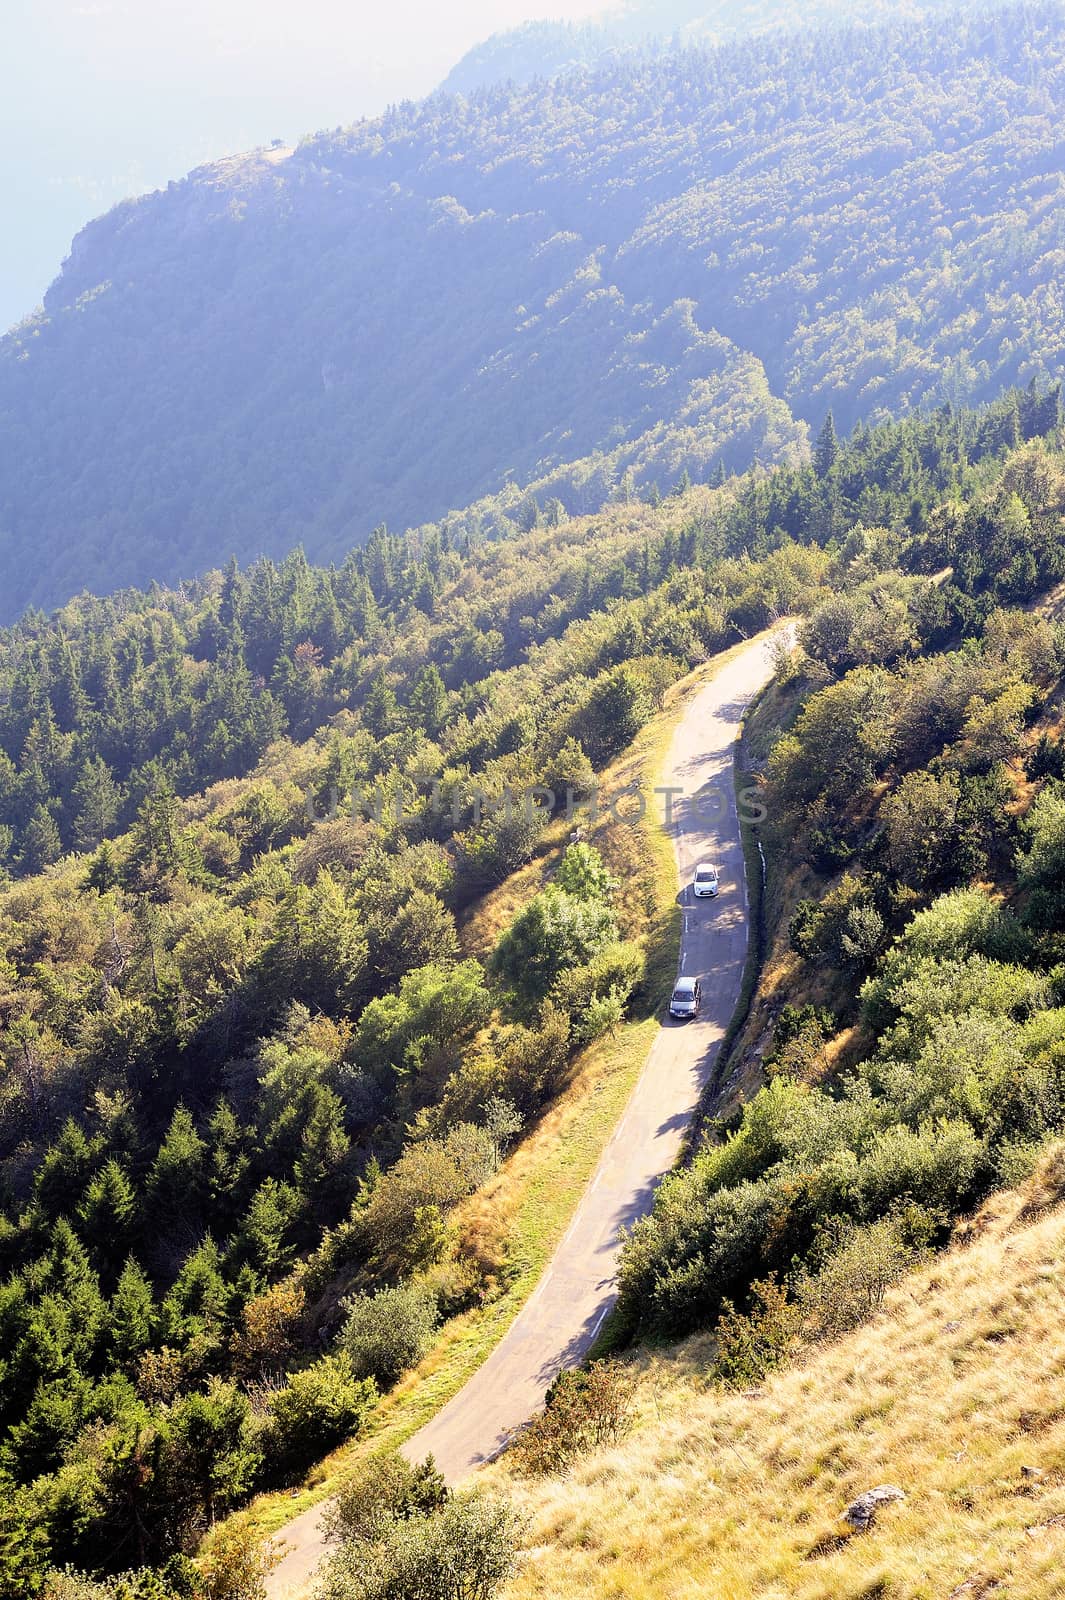 Mountain road in the Cevennes National Park.